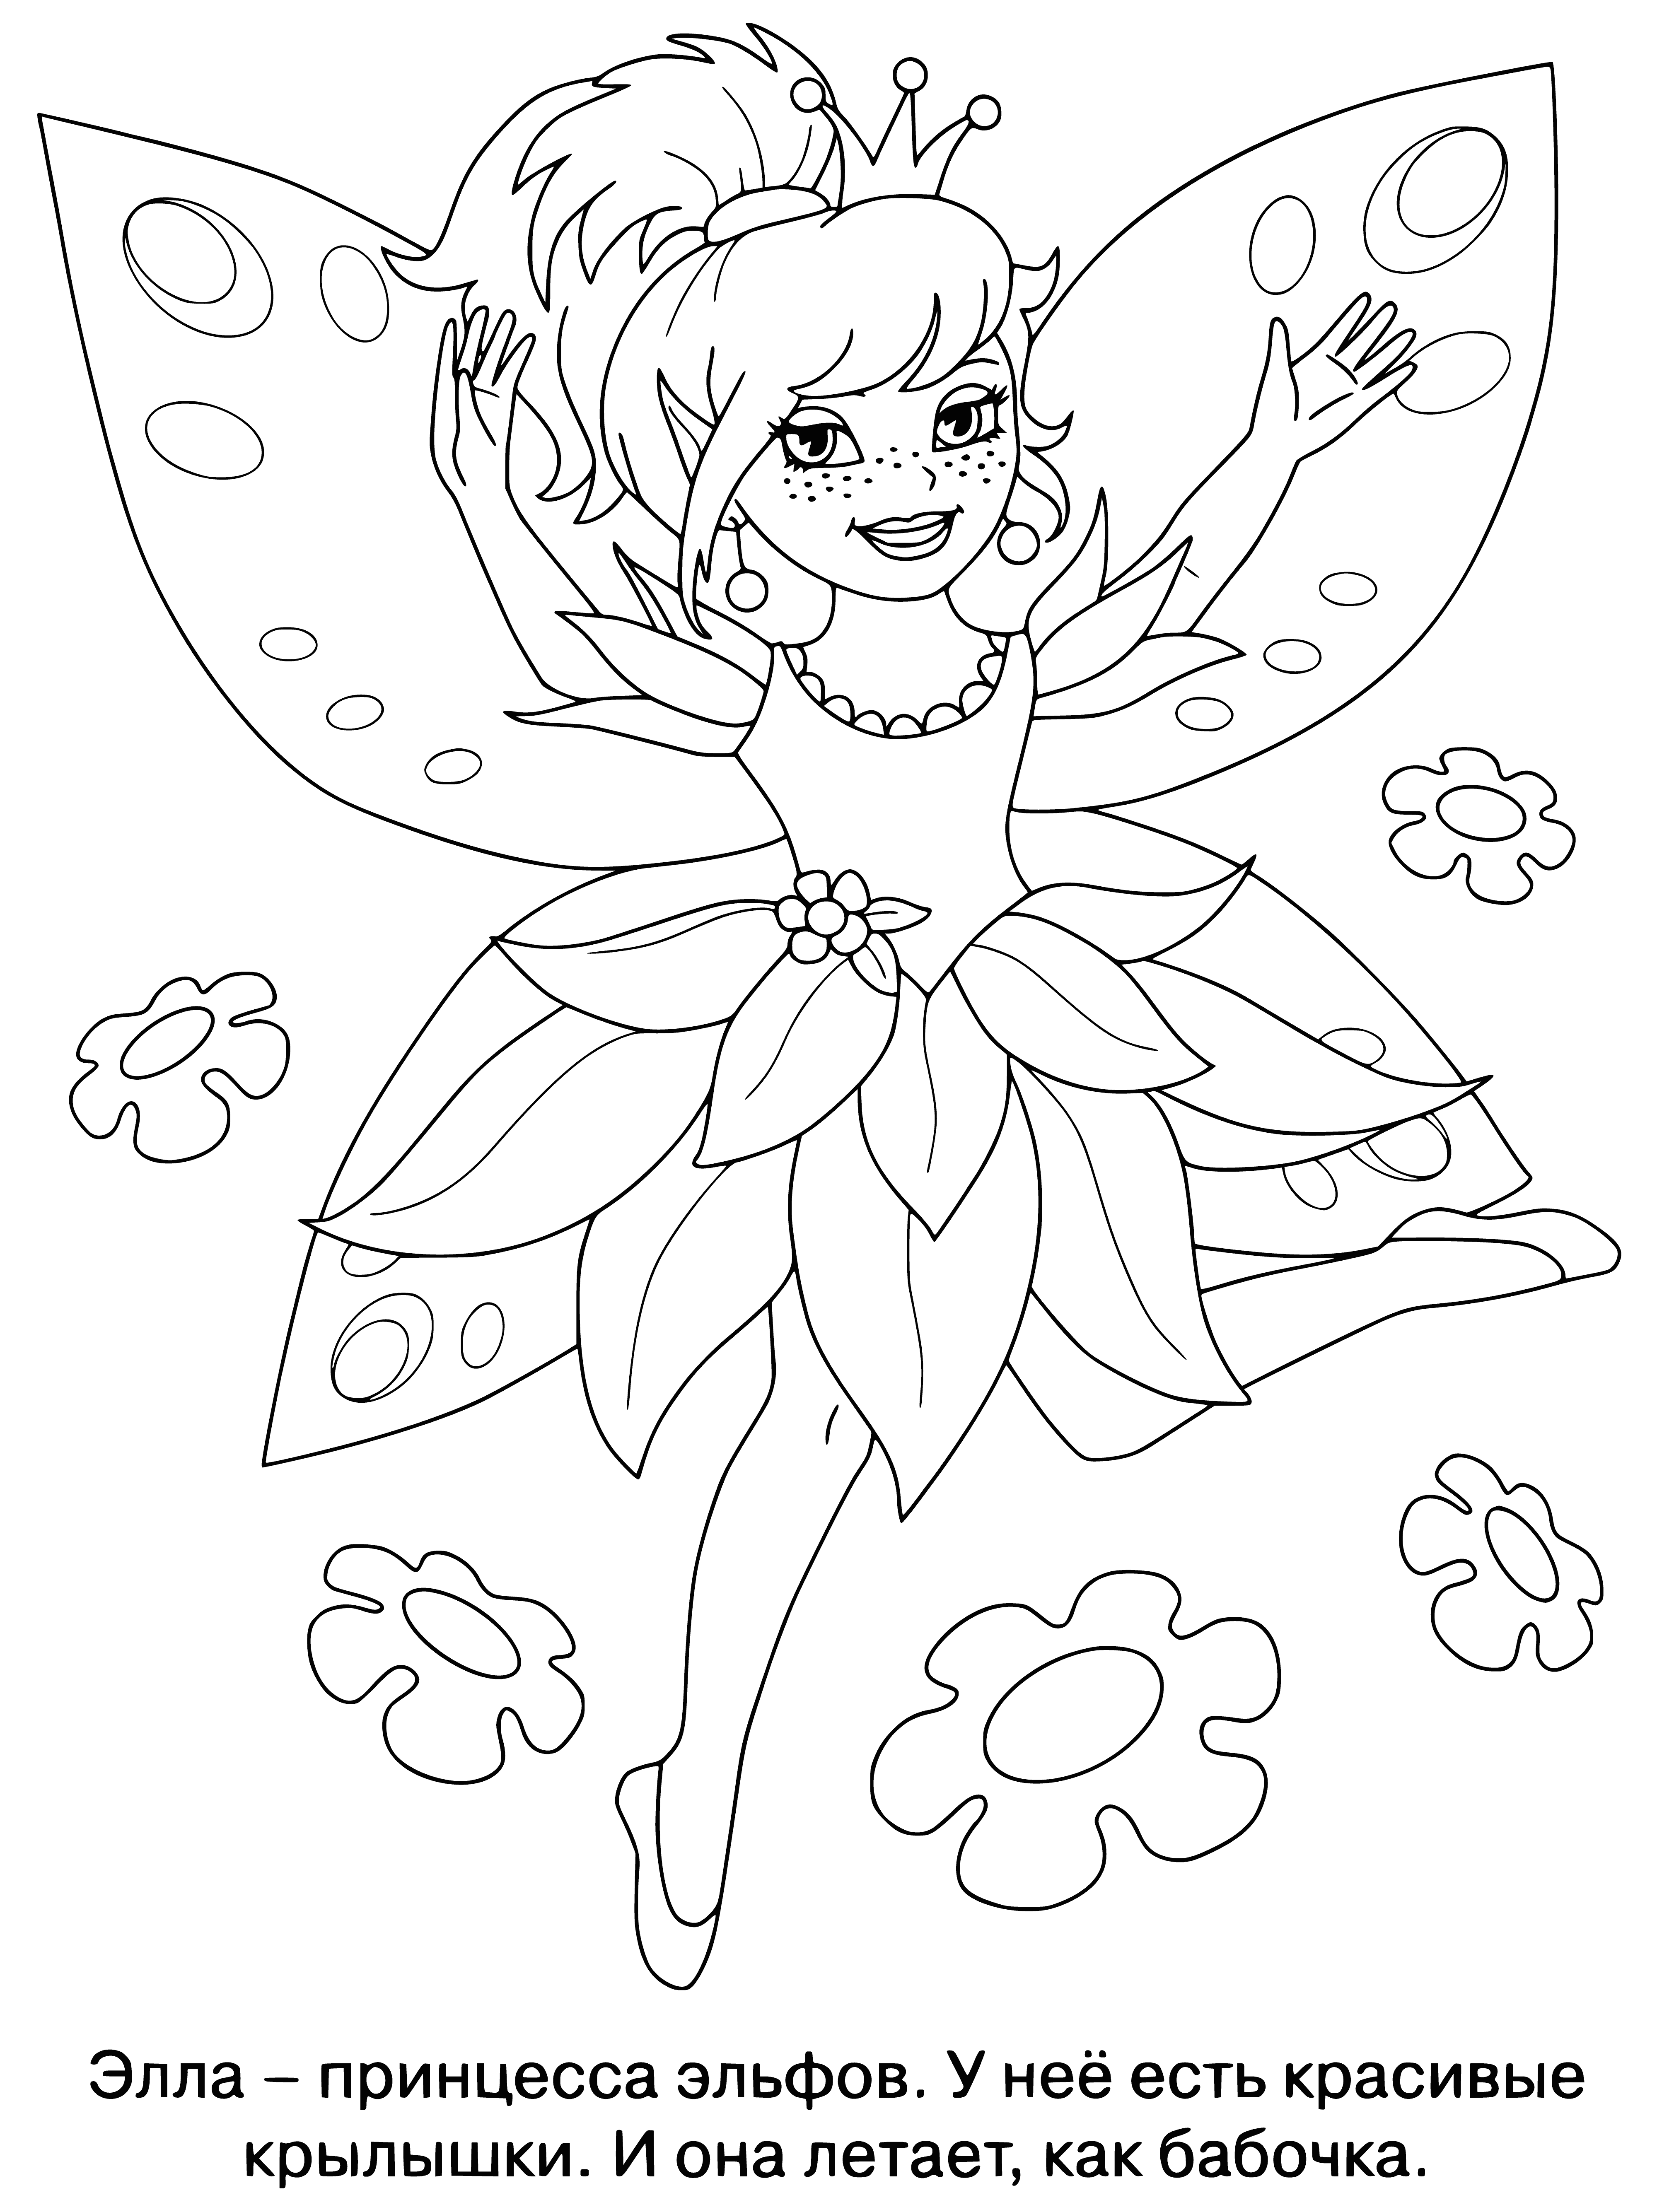 coloring page: A little girl wearing a princess dress and tiara paints her own castle with a brush and palette.